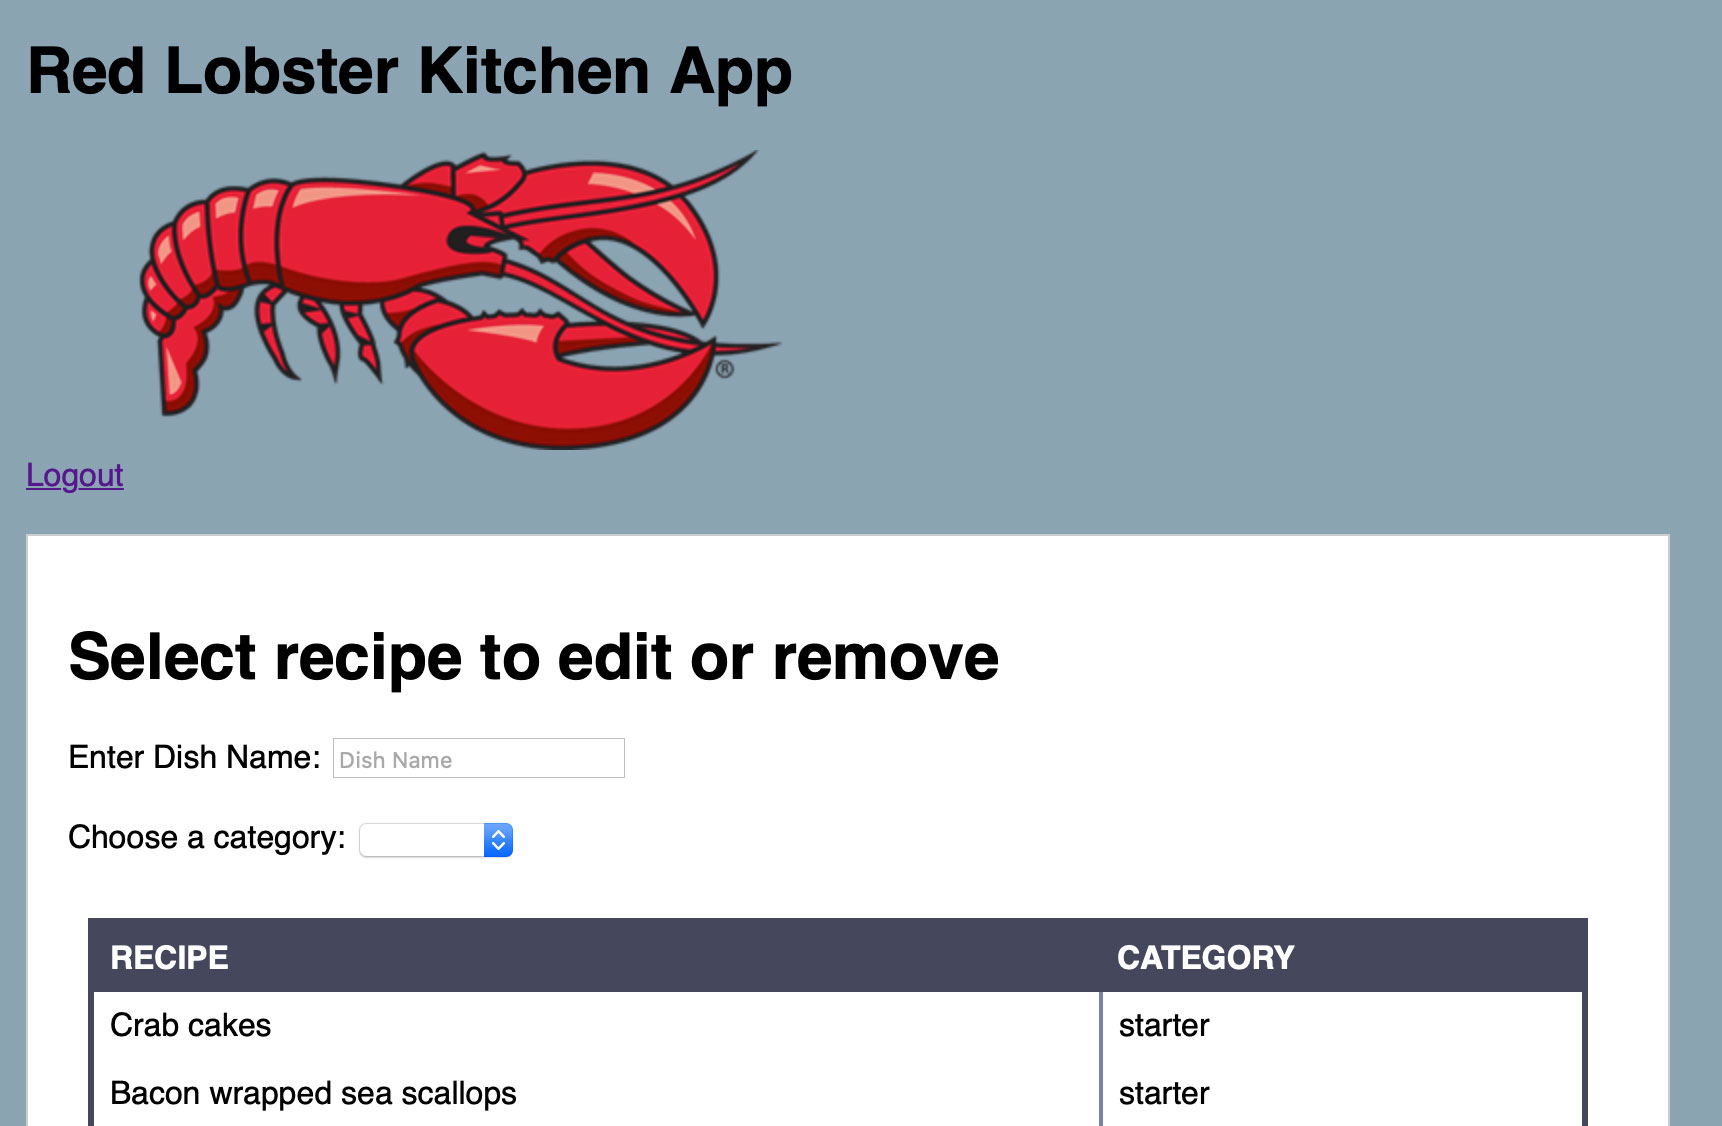 A team of Florida Polytechnic University capstone students has designed three app prototypes for Red Lobster to streamline restaurant kitchen access to its recipes.